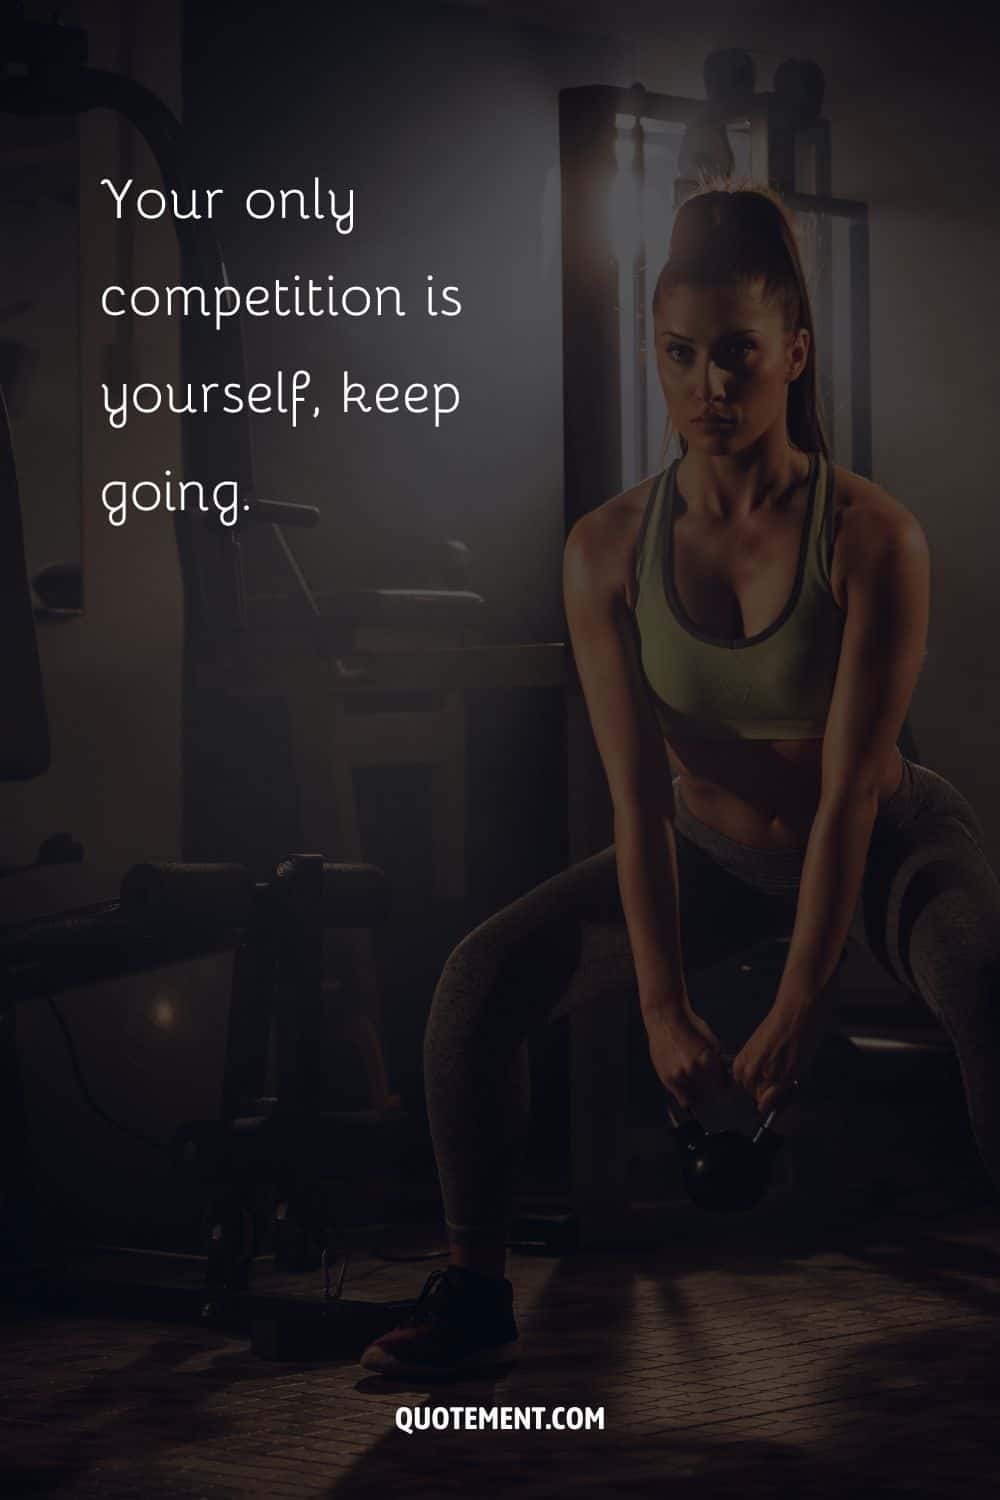 Your only competition is yourself, keep going